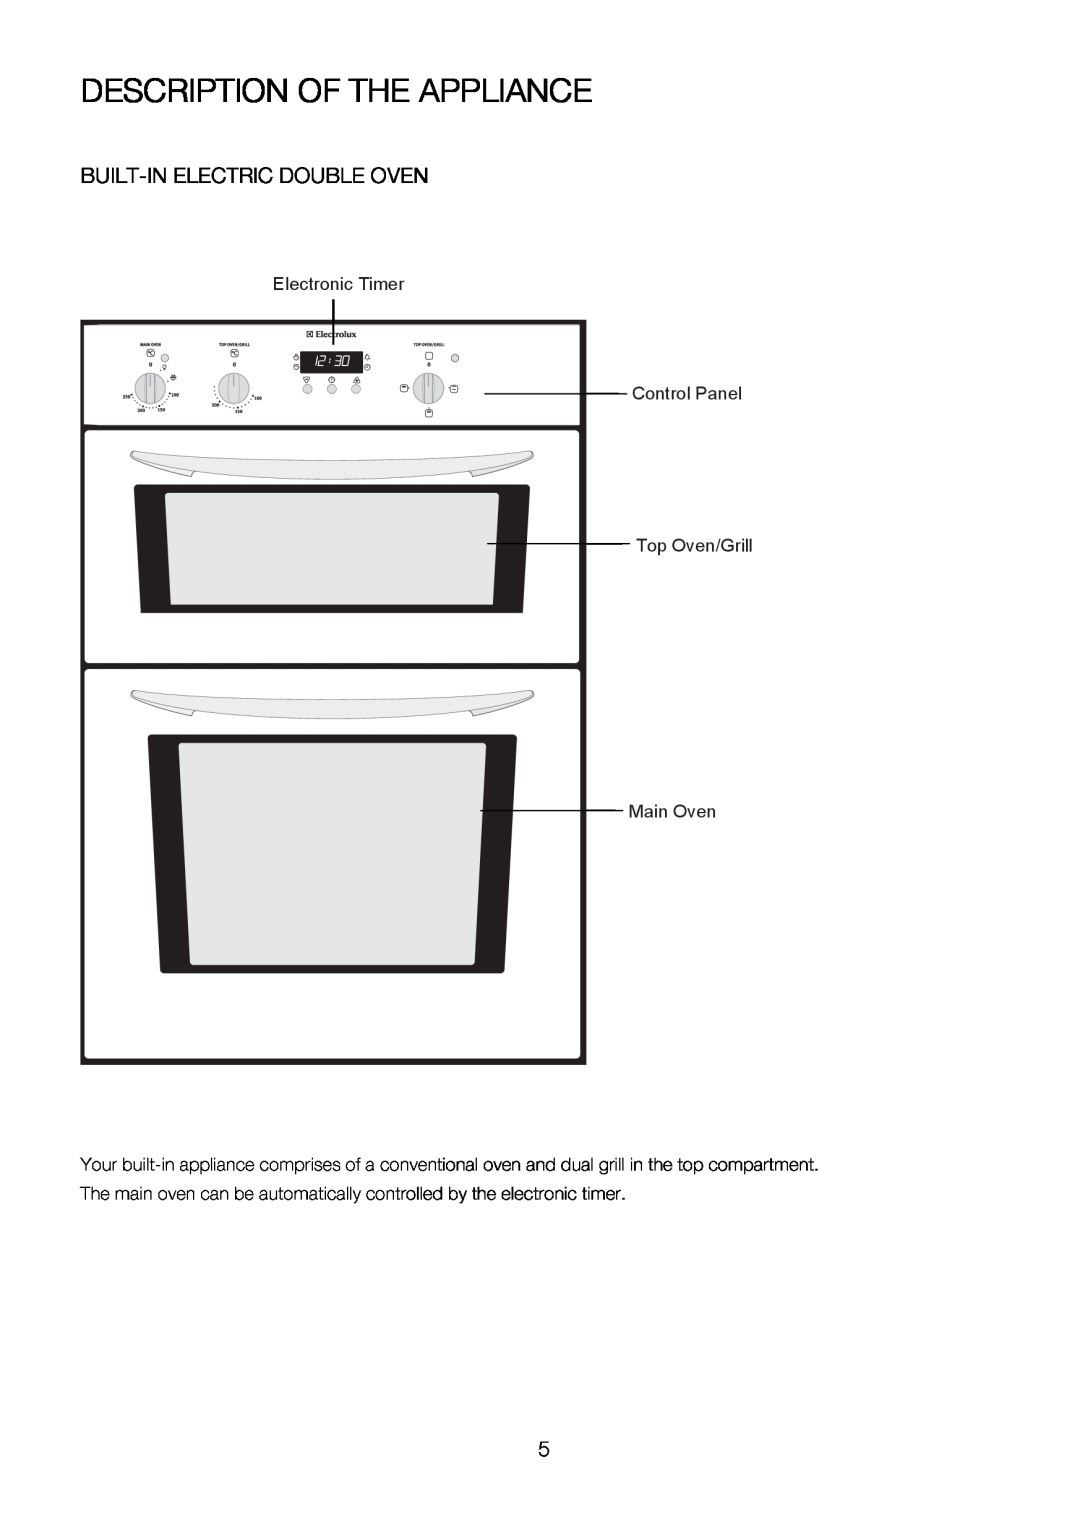 Electrolux EKC6047, EKC6046 user manual Description Of The Appliance, Control Panel Top Oven/Grill Main Oven 